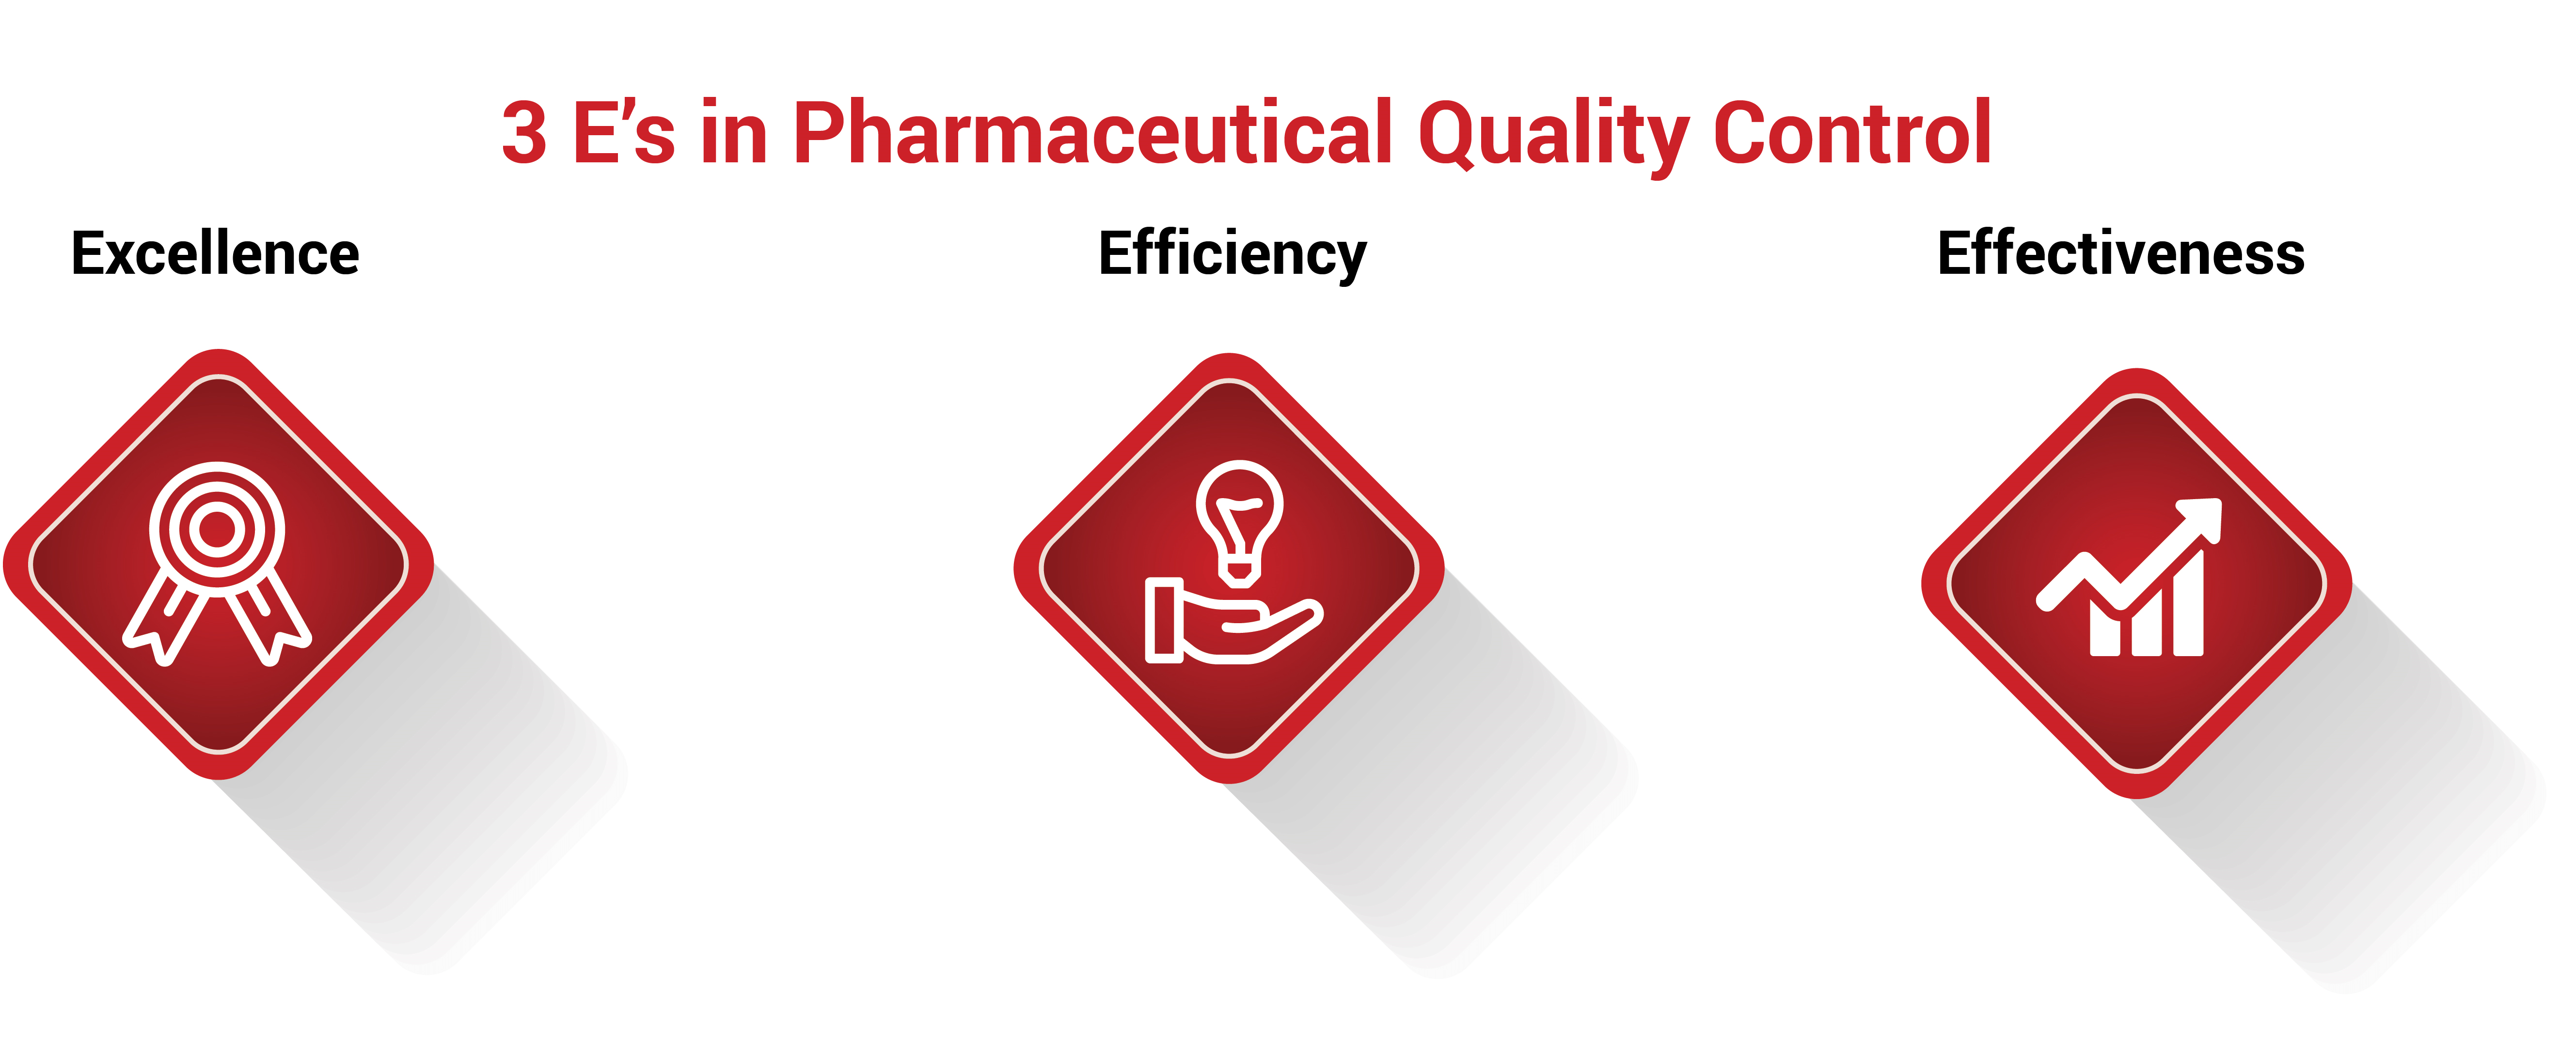 Three E Logo - The Three E's In Pharmaceutical Industry Quality Control